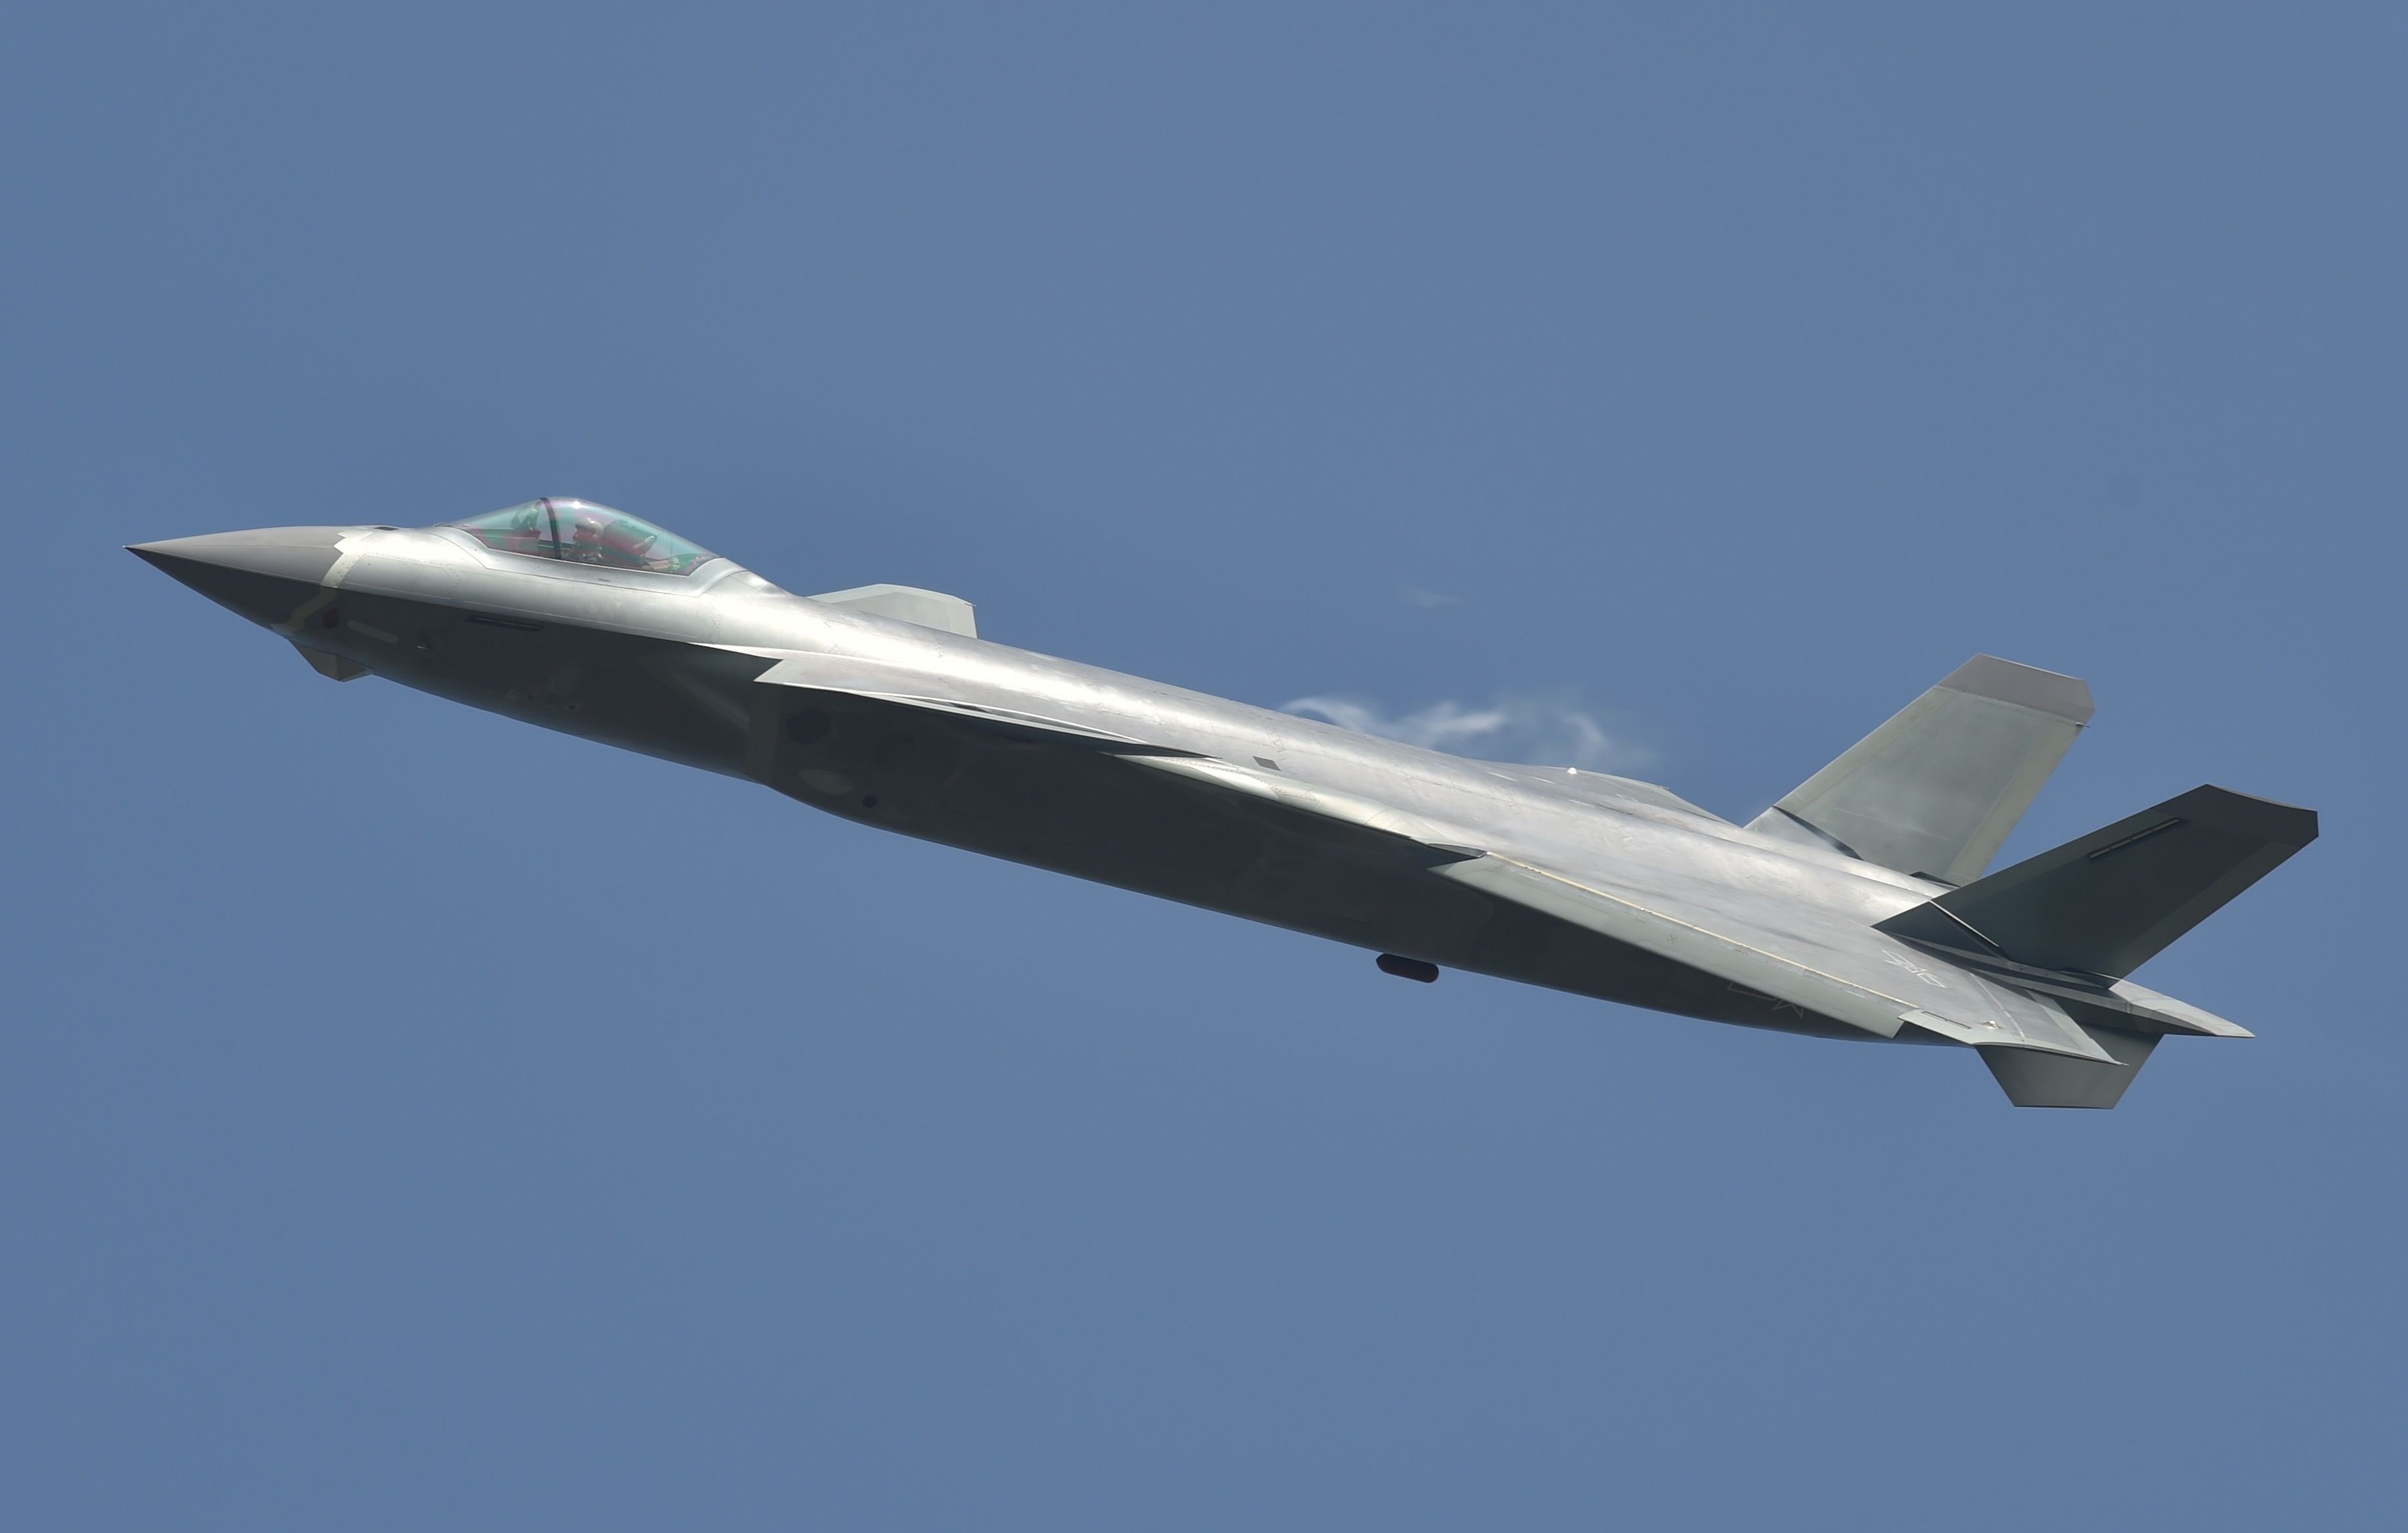 grey jet plane in mid-air, Chengdu J-20, Stealth fighter, People's Liberation Army Air Force